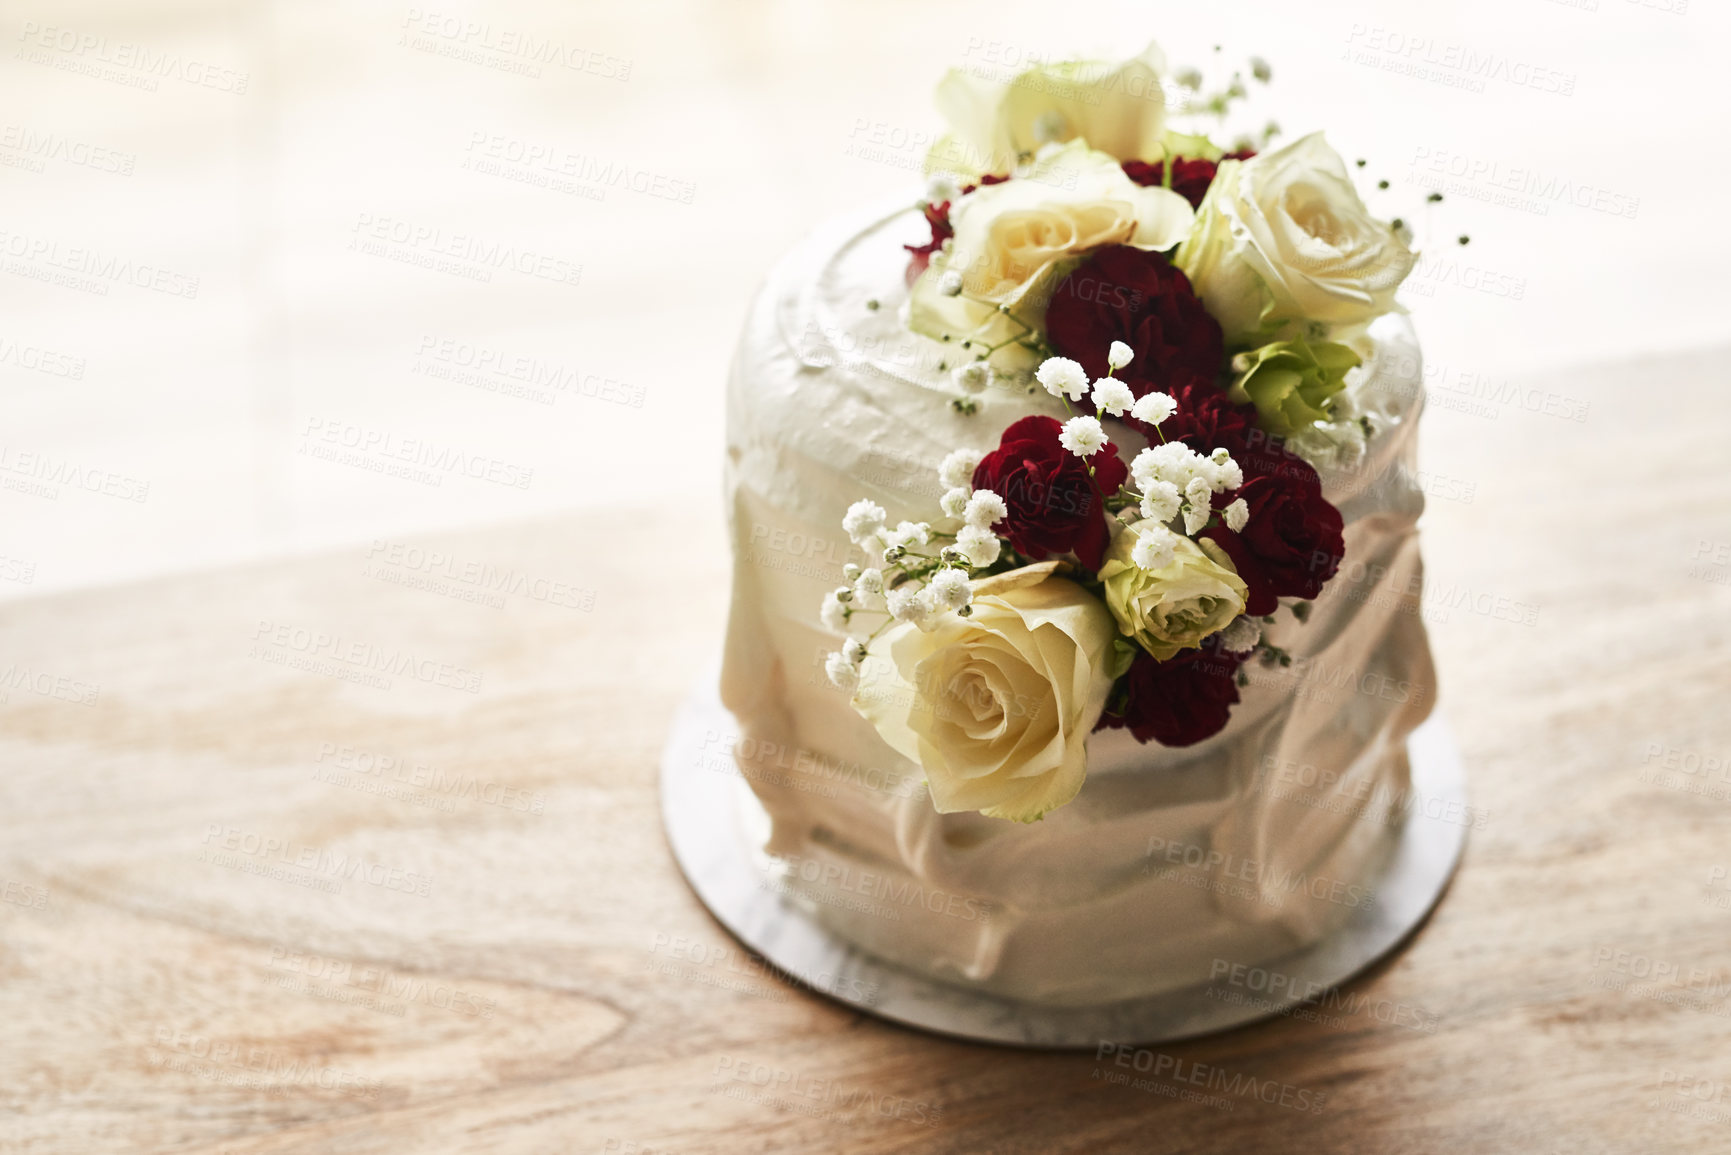 Buy stock photo Still life shot of a beautiful wedding cake on top of a wooden surface